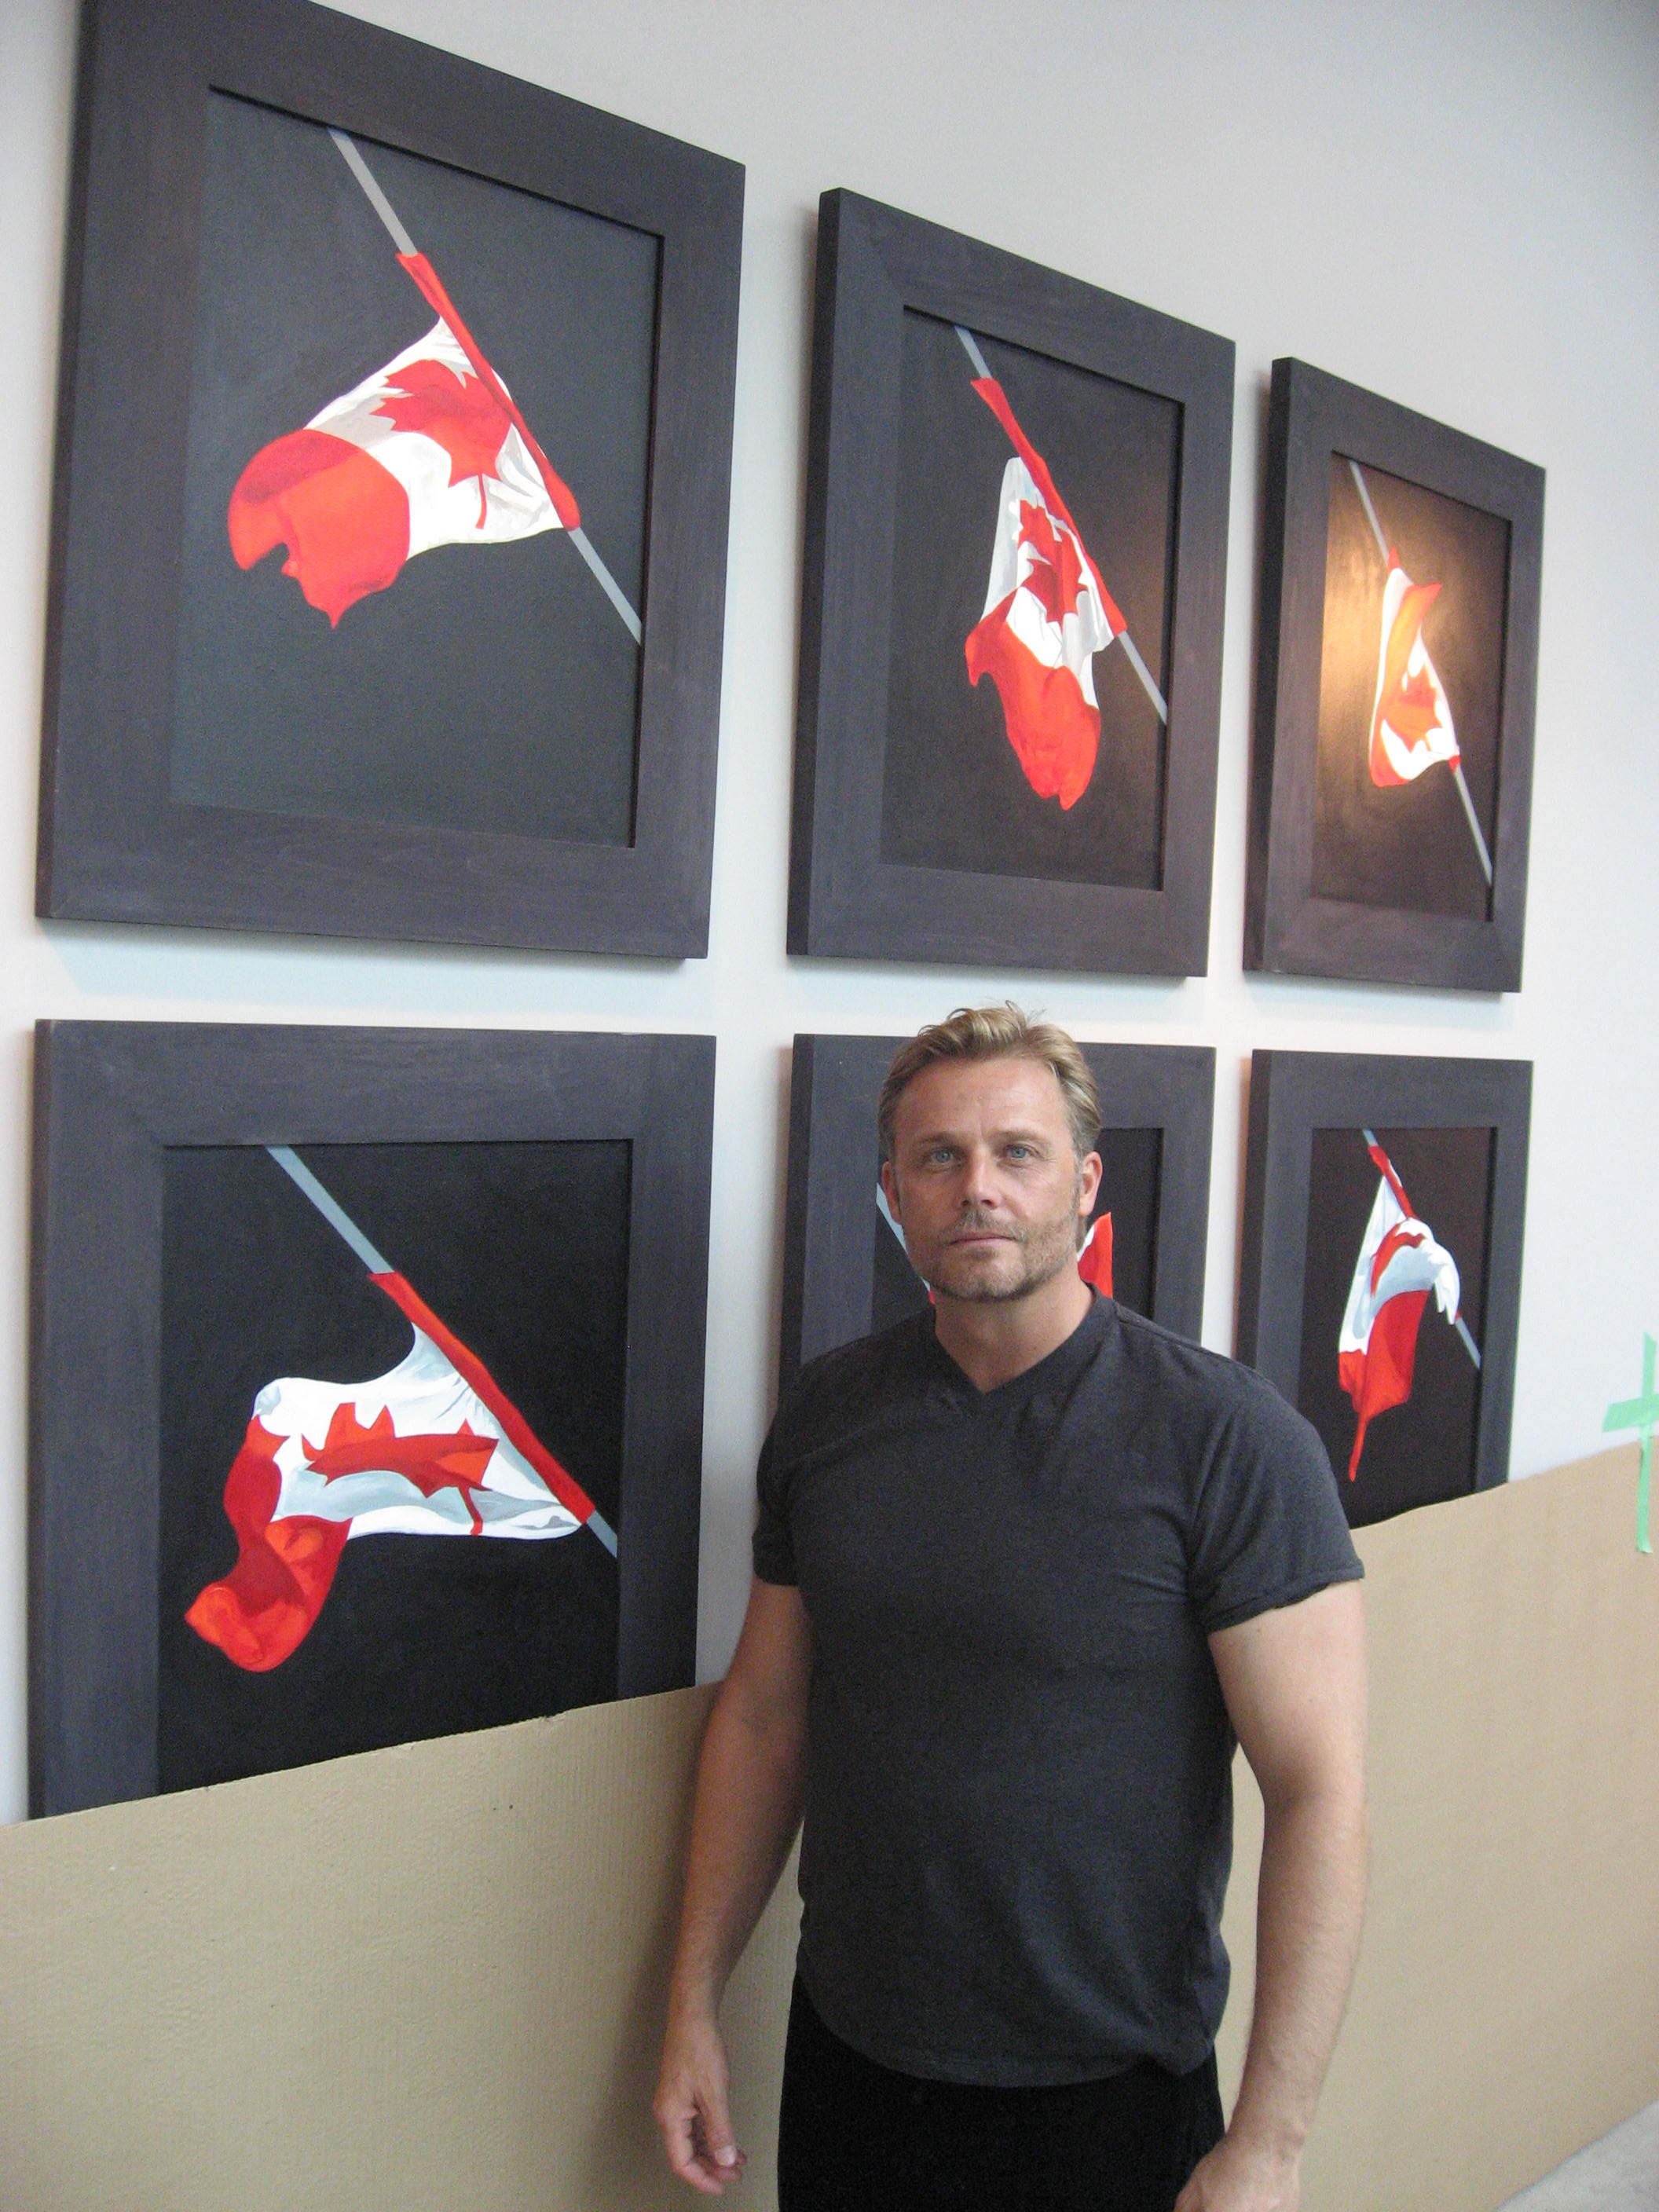 AJ on set of Being Erica. Filming at the home of the famous Canadian painter, Charles Pachter.